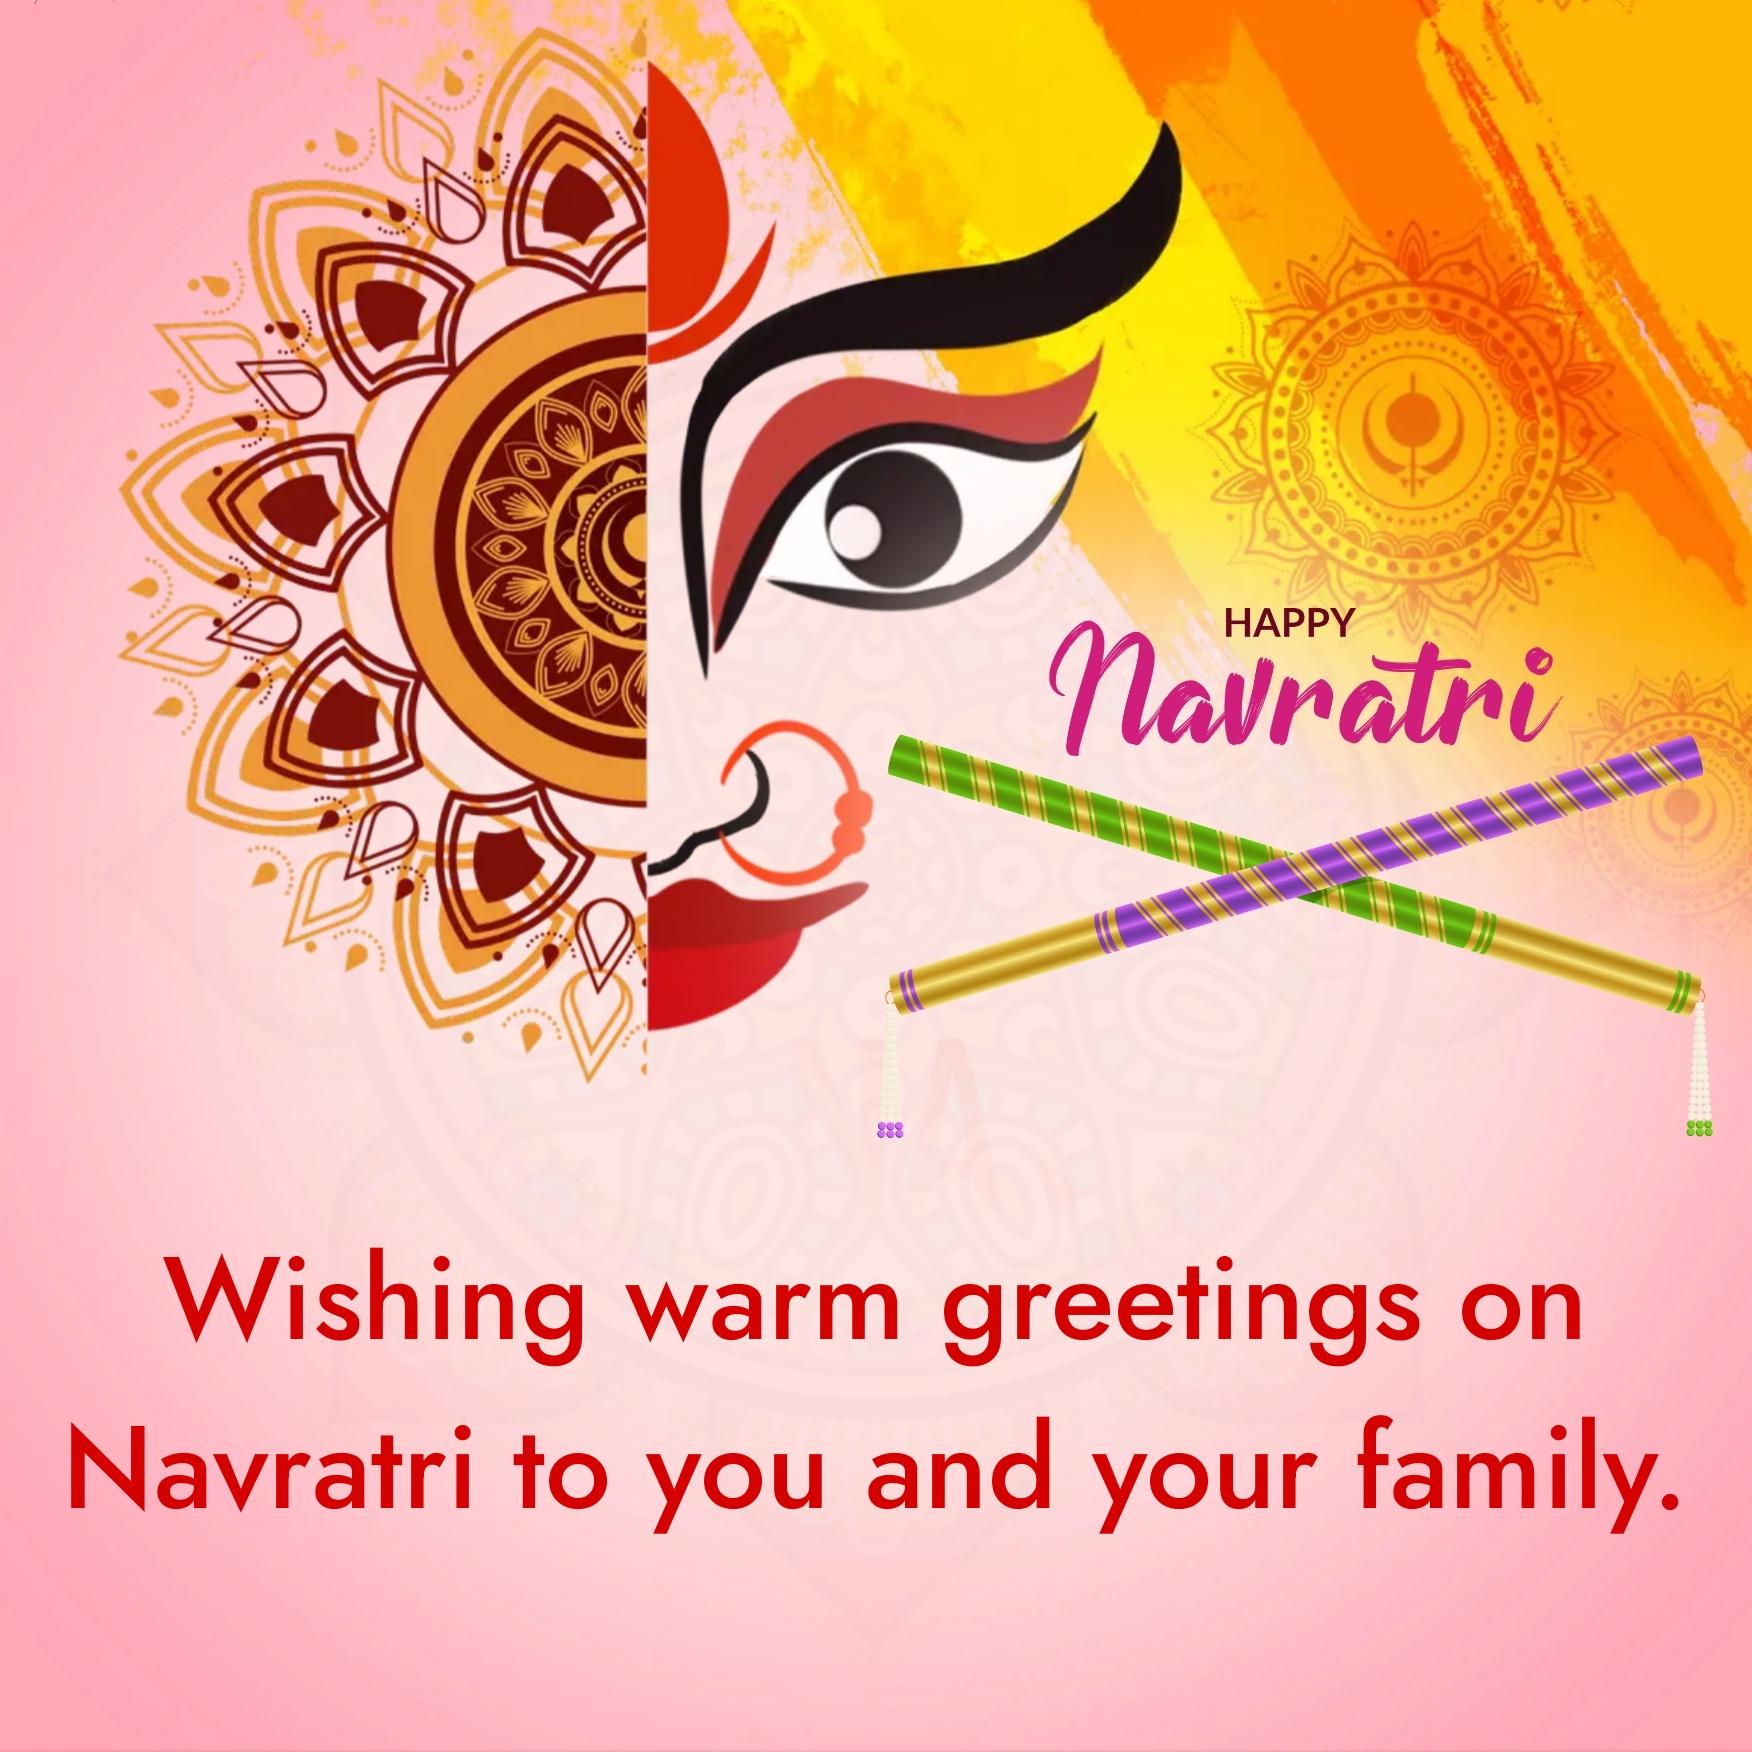 Wishing warm greetings on Navratri to you and your family